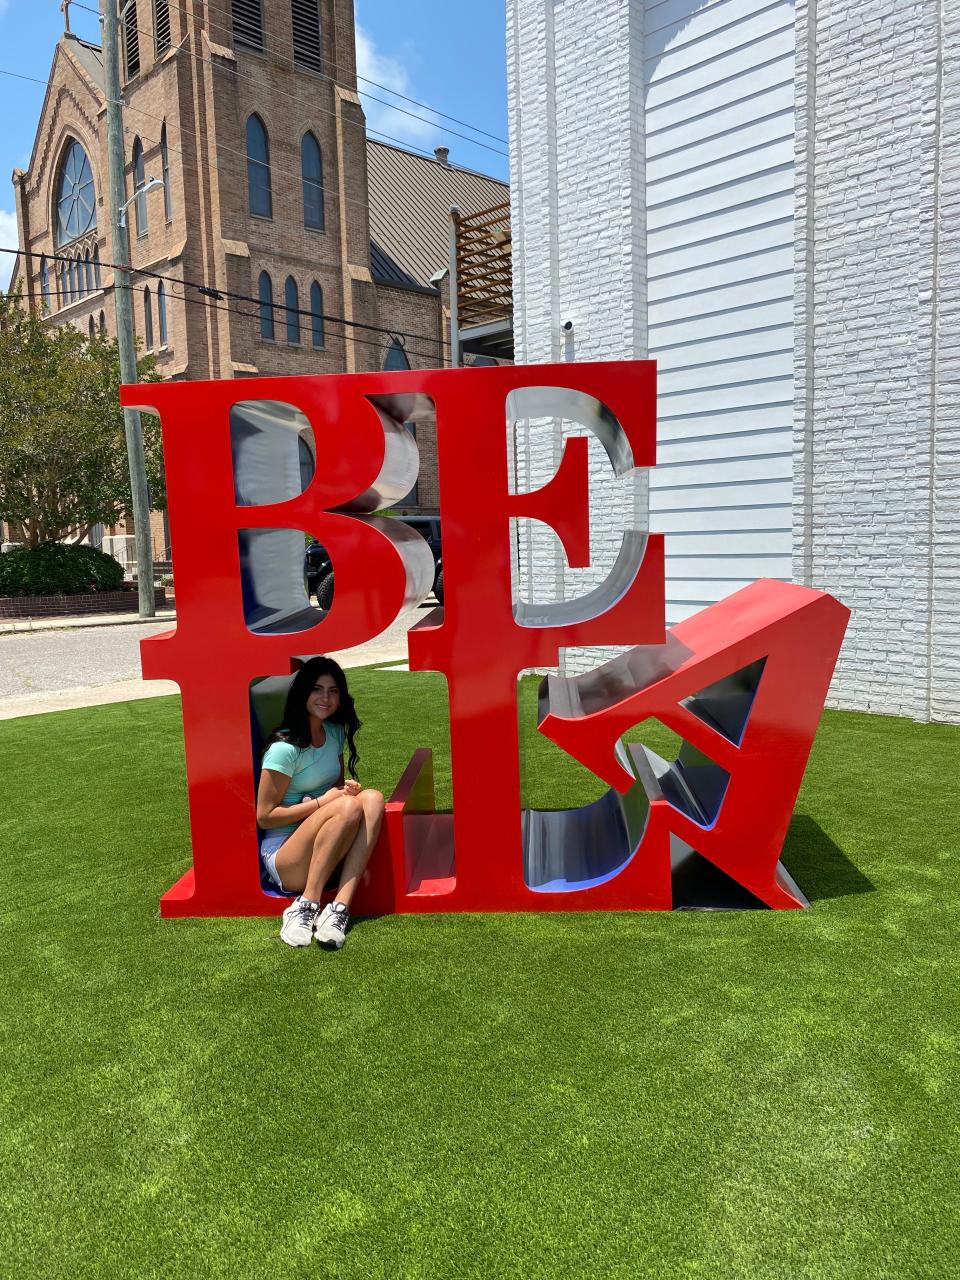 Bella Spinner, daughter of the developers and namesake of The Bella, poses with the monument sign on the front lawn.